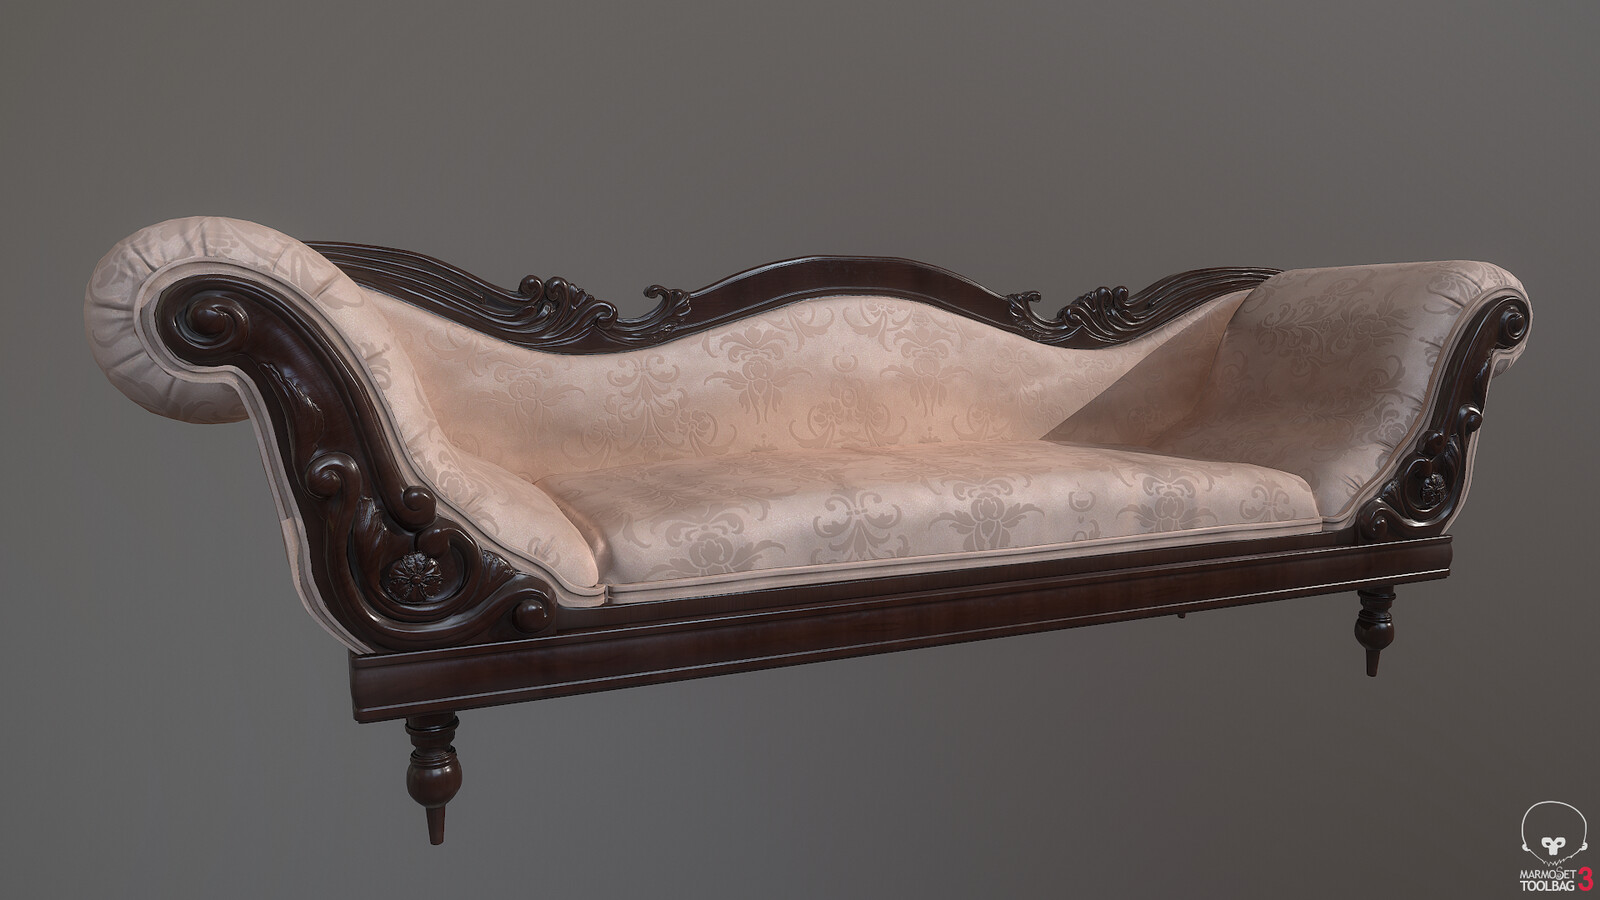 Sofa, base model in Max, sculpt in ZBrush, and textured in Substance.